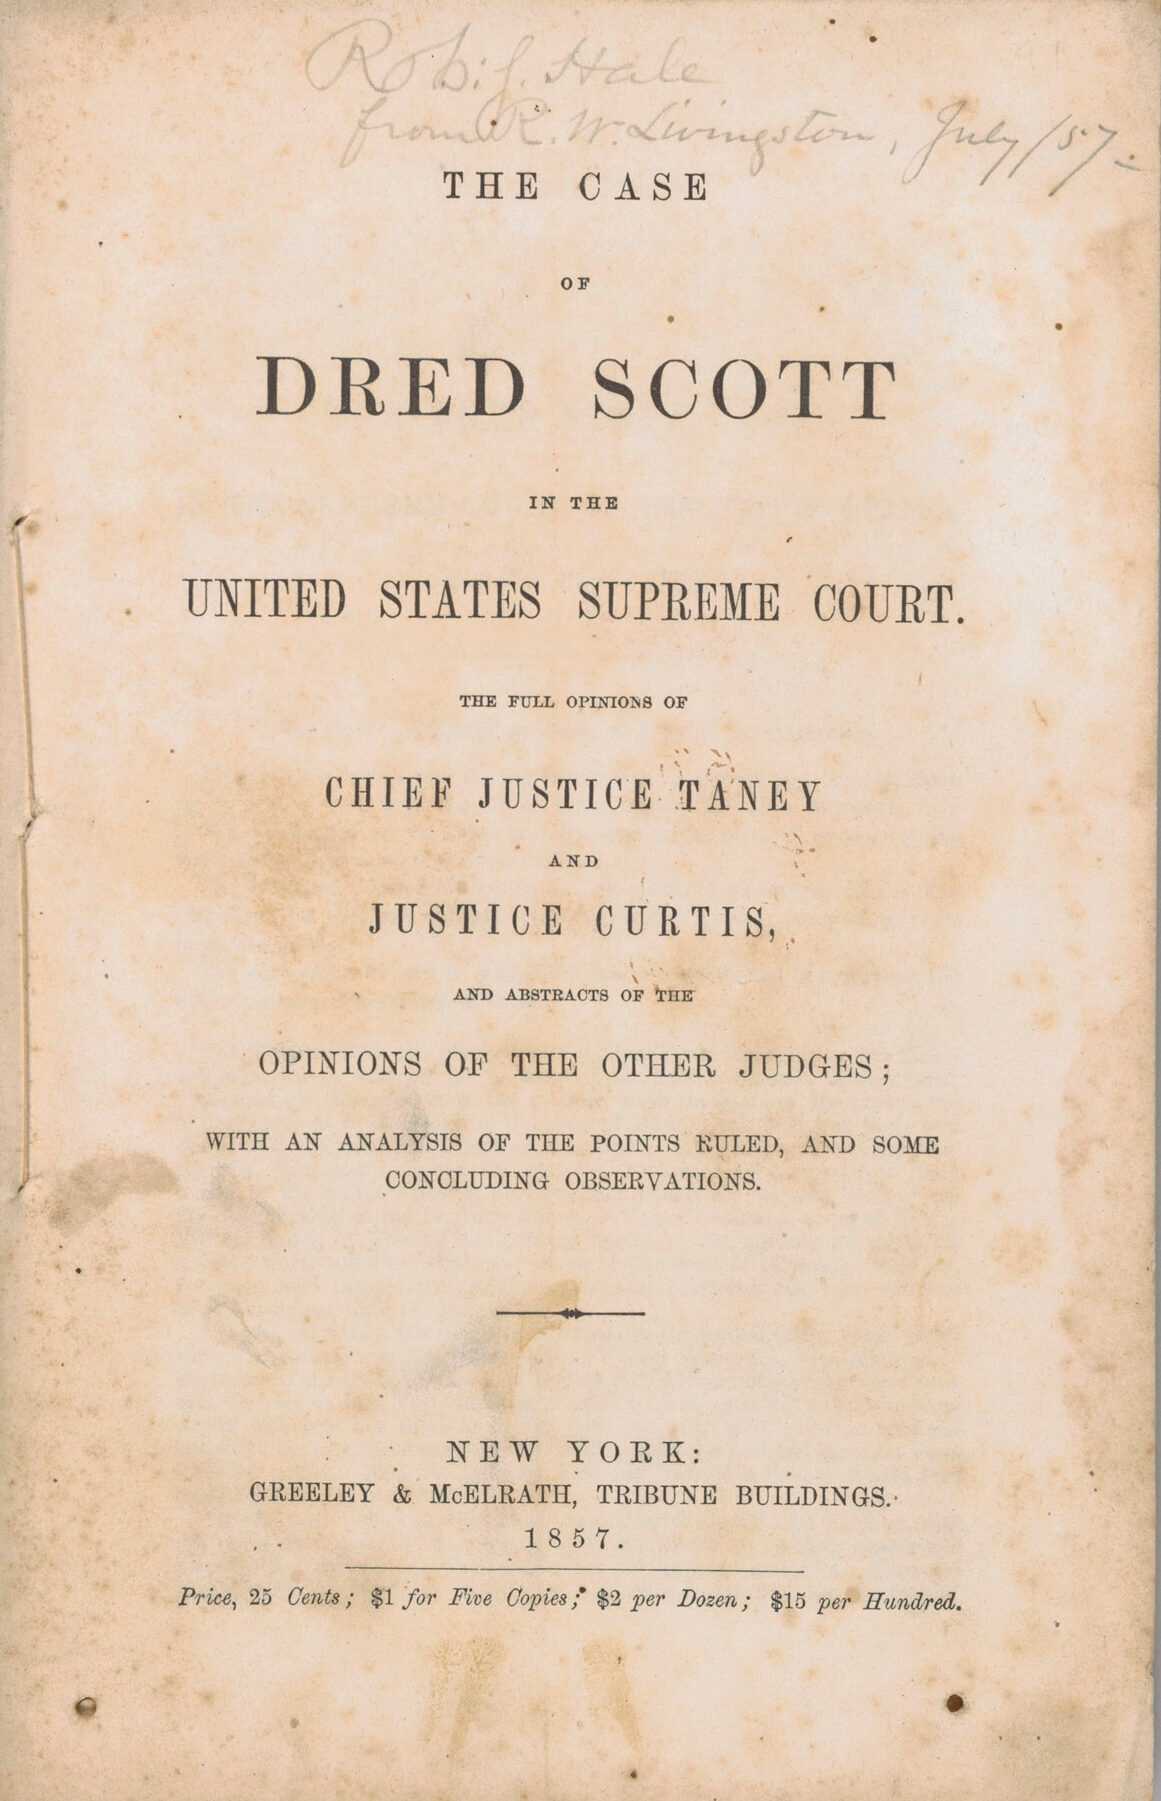 A first edition, octavo volume of The Case of Dred Scott in the United States Supreme Court with sewn self-wrappers. The title and publishing information are printed in black ink, centered on the front wrap against a plain background: [The Case / OF / DRED SCOTT / IN THE / UNITED STATES SUPREME COURT. / THE FULL DECISION OF / CHIEF JUSTICE TANEY / AND / JUSTICE CURTIS / AND ABSTRACTS   OF THE / OPINIONS OF THE OTHER JUDGES; / WITH ANALYSIS OF THE POINTS RULED, AND SOME / CONCLUDING OBSERVATIONS. / NEW YORK / GREELEY & McELRATH, TRIBUNE BUILDINGS / 1857. / Price, 25 Cents; $1 for Five Copies; $2 per Dozen; $15 per Hundred.] There are 104 pages. The text concludes with the sections [RESOLUTIONS] and [AN ACT TO SECURE THE FREEDOM OF ALL PERSONS WITHIN THIS STATE.] on the back. The volume is inscribed to the New York State congressman Robert J. Hale at the top center of the front wrap: [Robt. Hale from R. W. Livingston, July / 57].